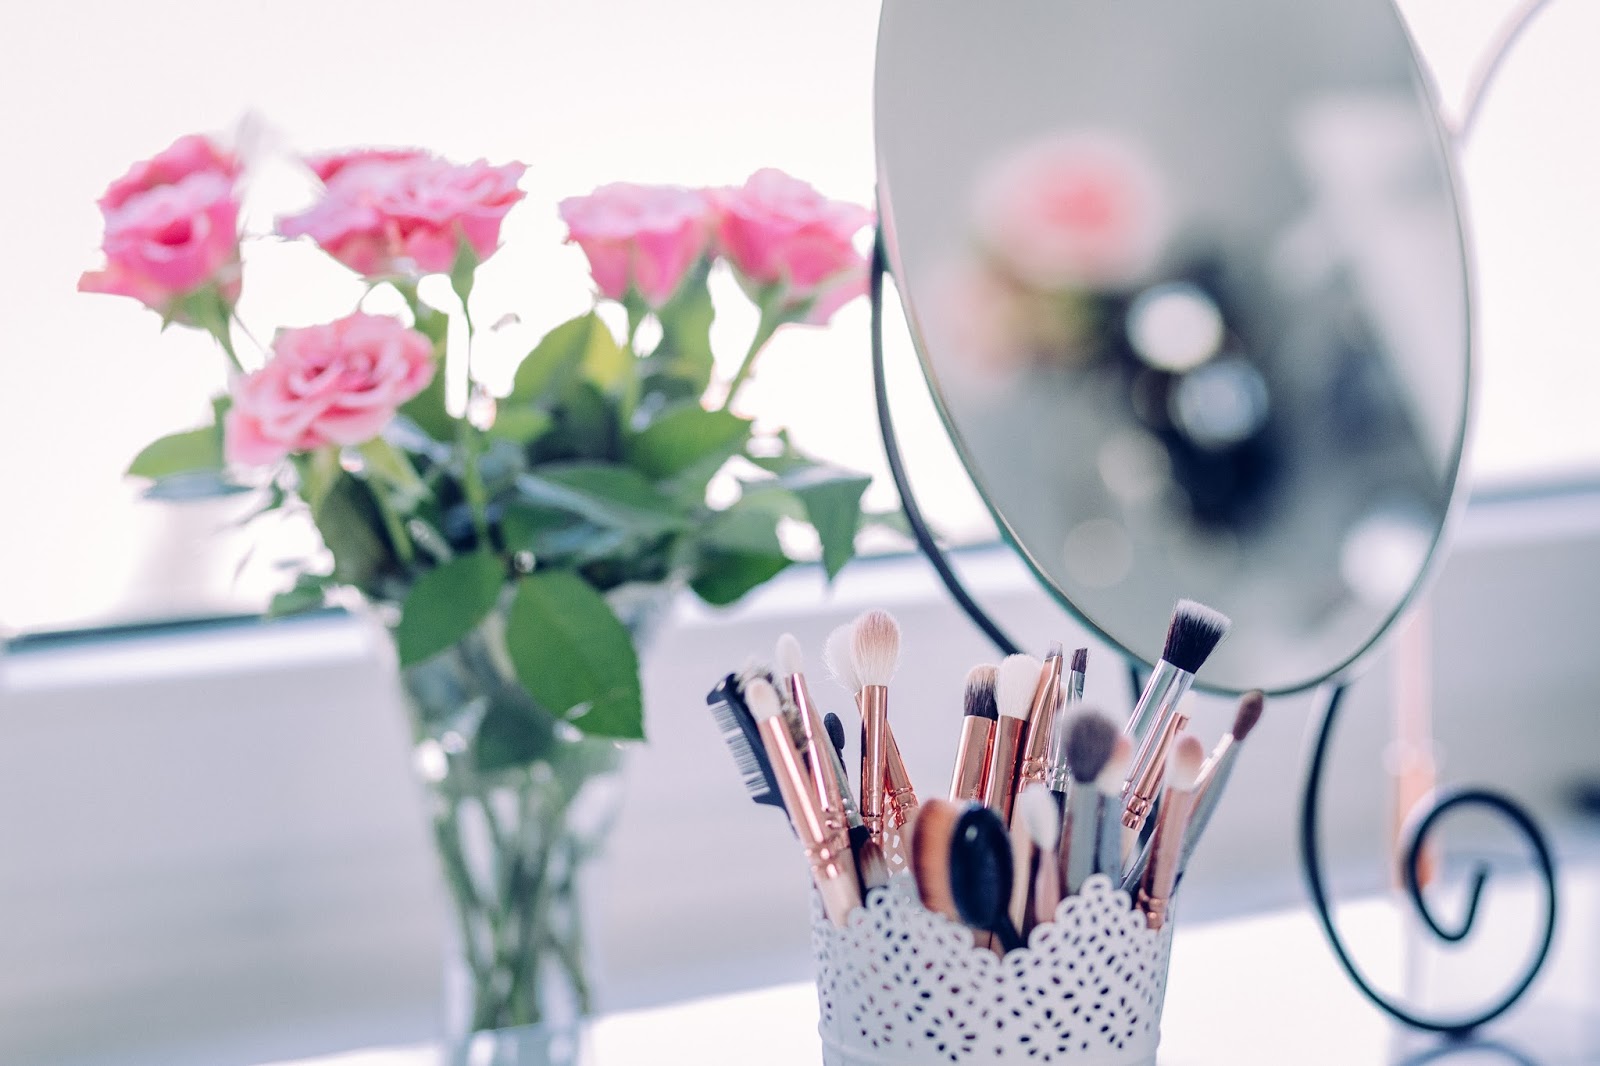 Makeup brushes set by Zaful